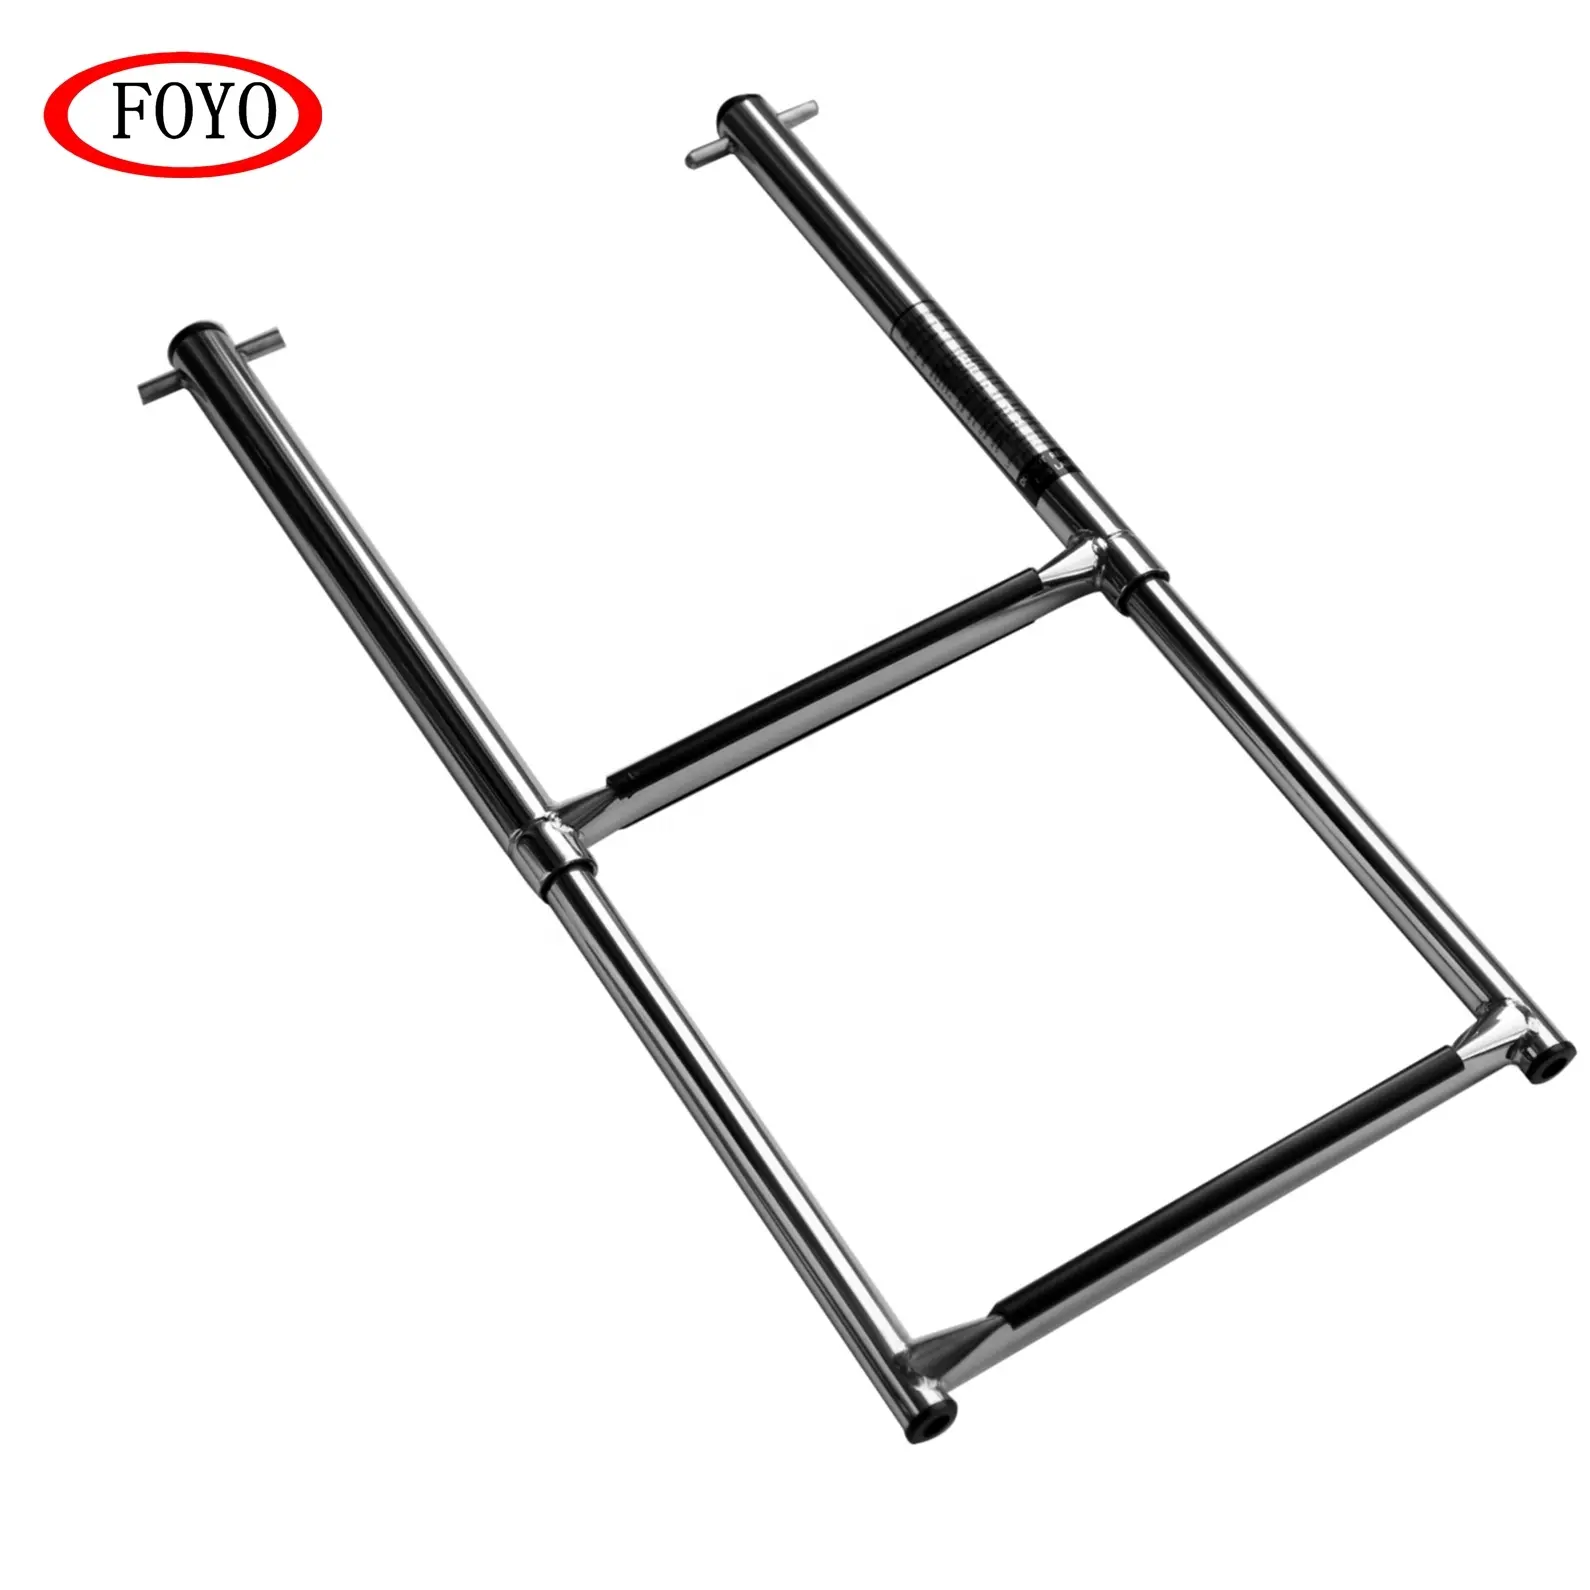 FOYO Brand Boat Accessories Marine Stainless Steel 2 step Telescopic Under Platform Ladders for Sailboat and Kayak and Yacht